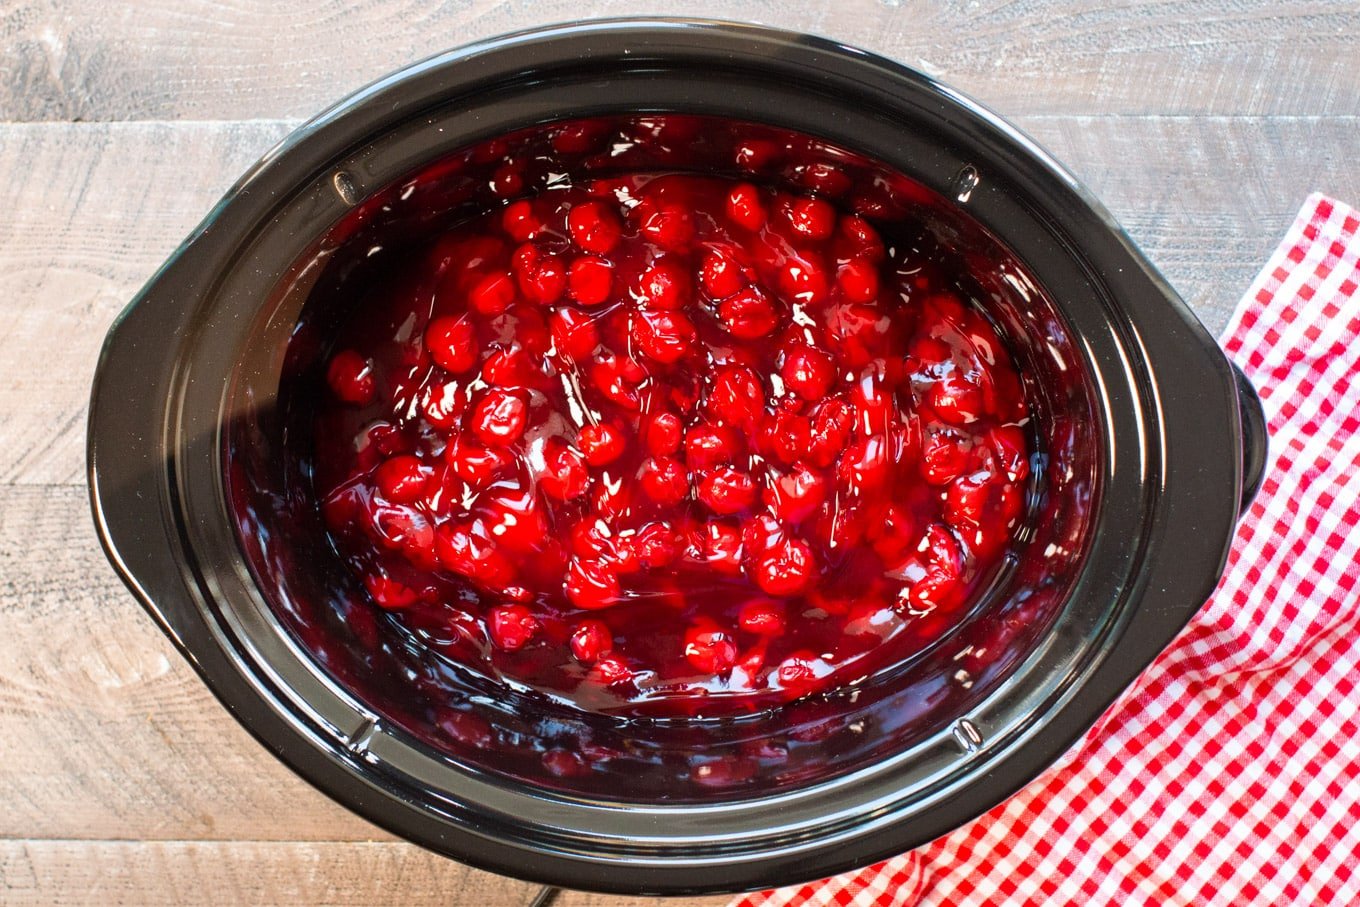 2 cans of cherry pie filling in slow cooker